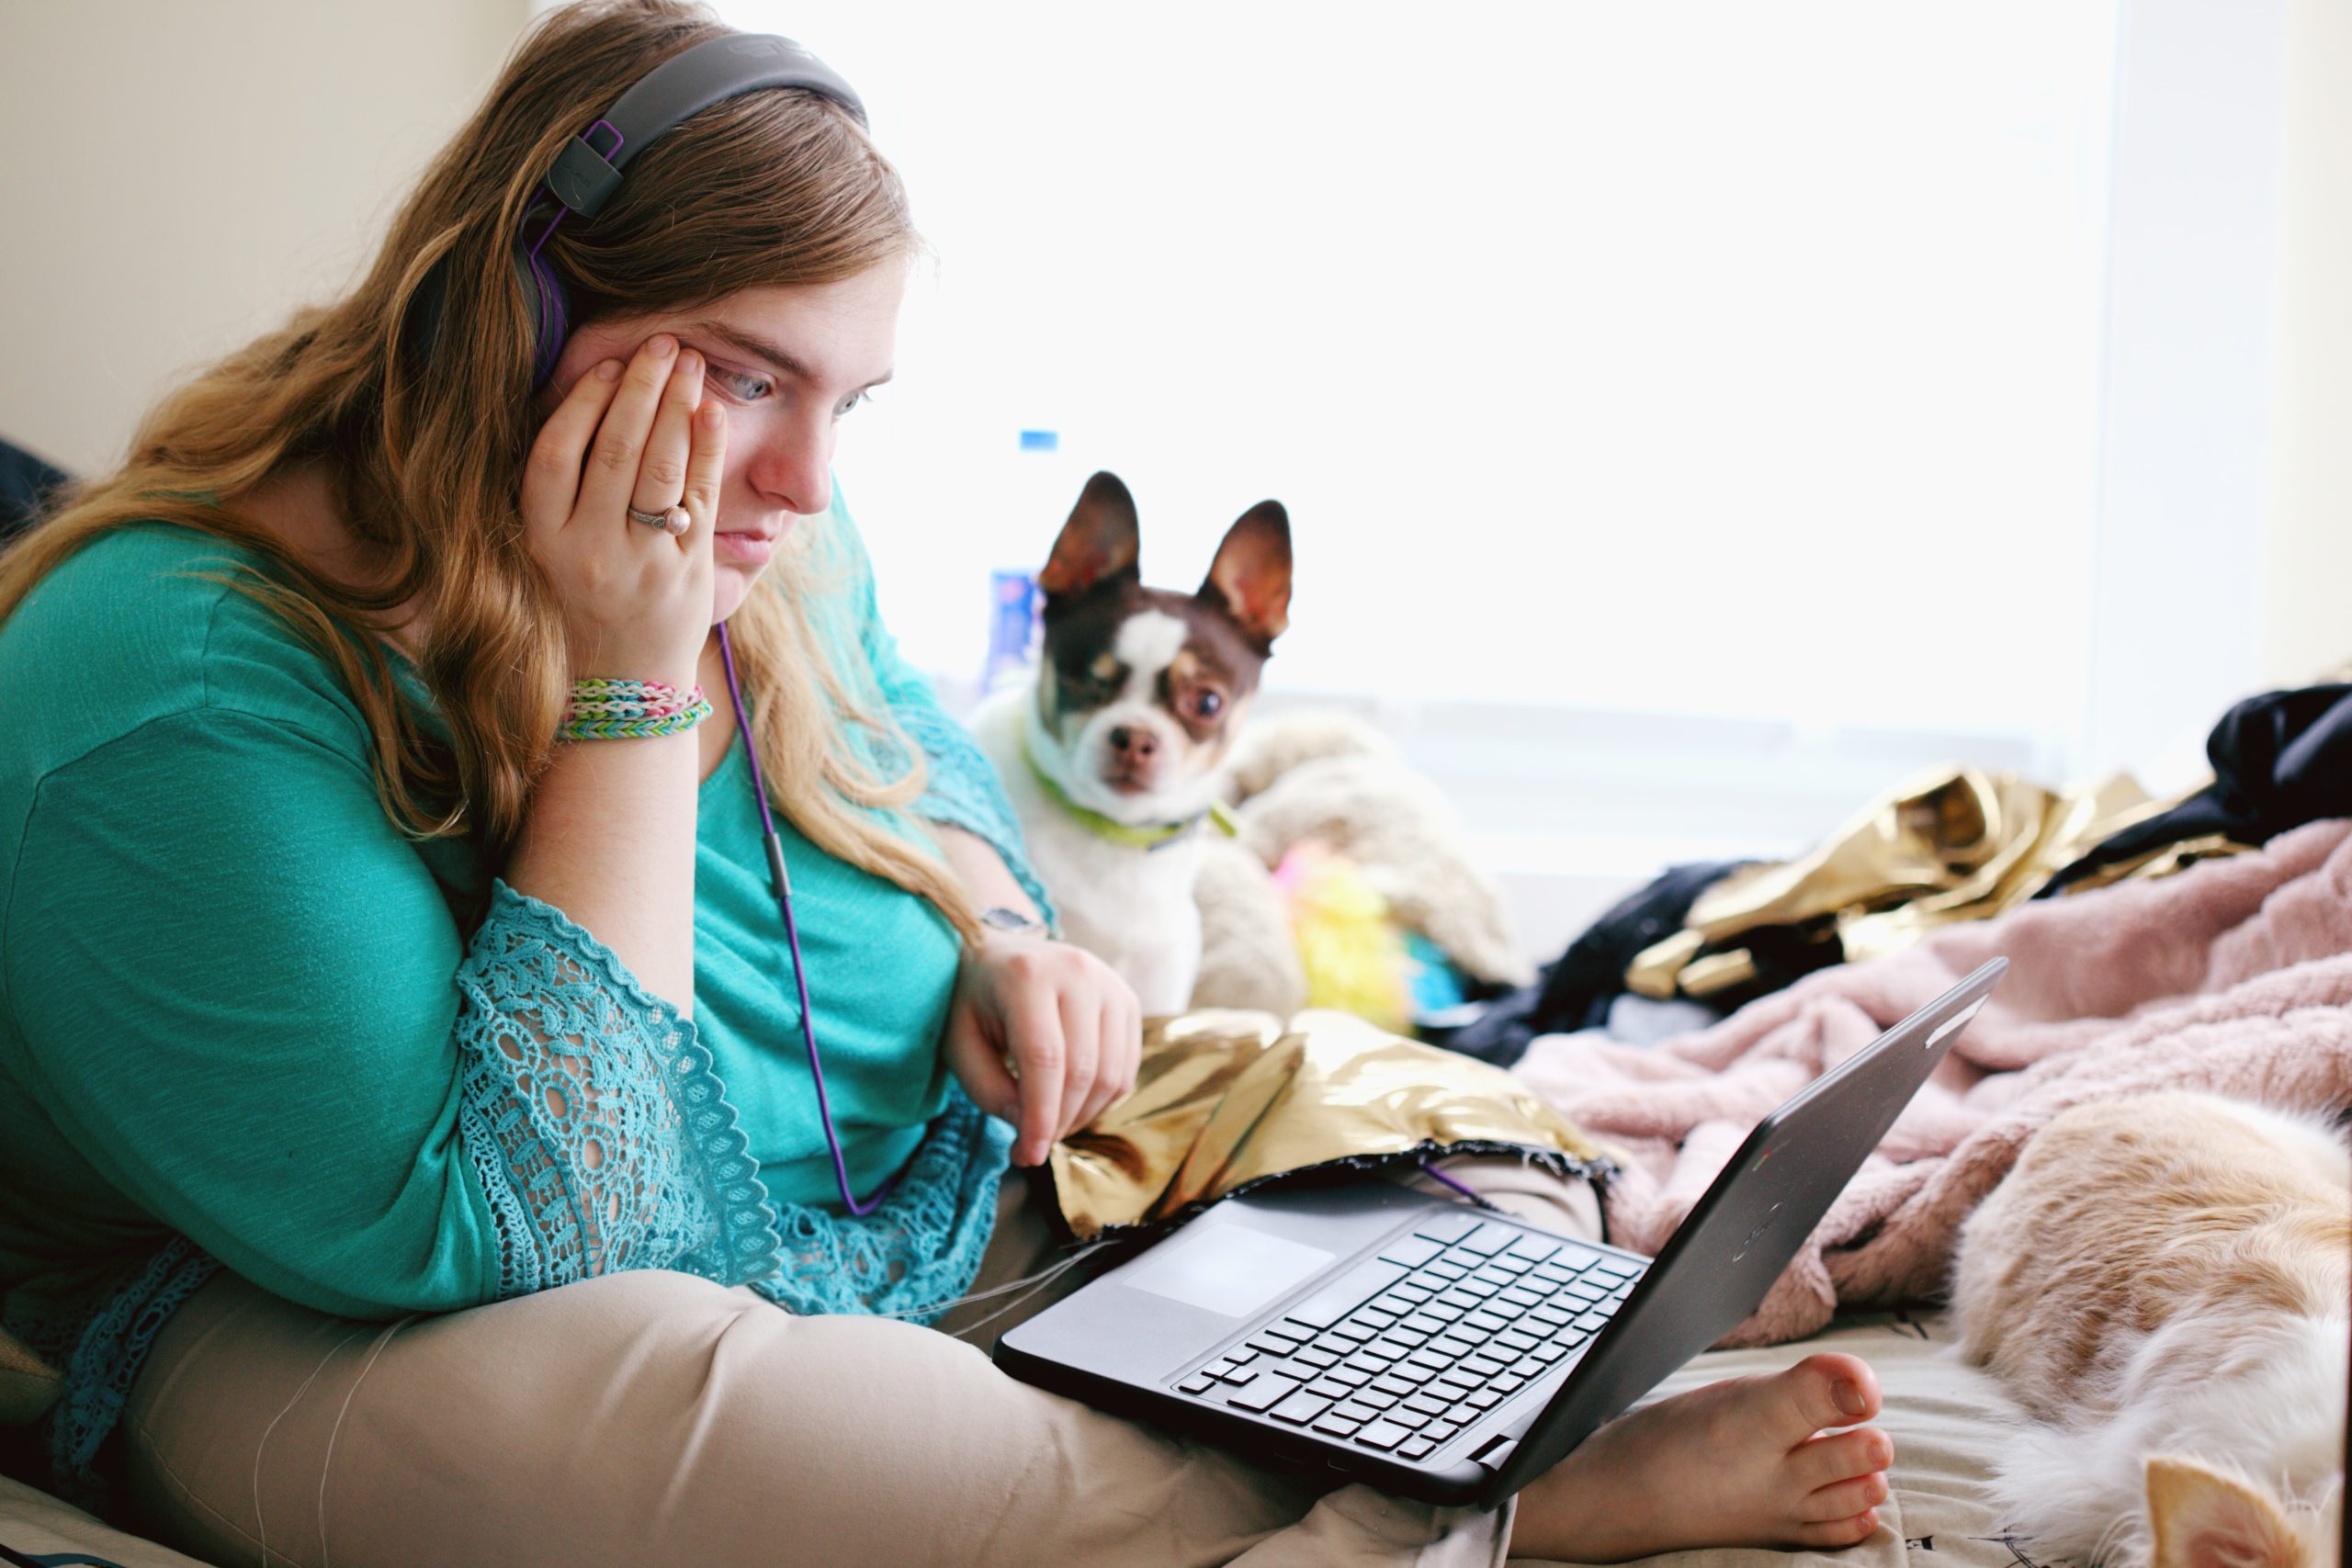 A person in a teal shirt and khakis sits on a bed while looking at a computer. A dog is sitting beside them.